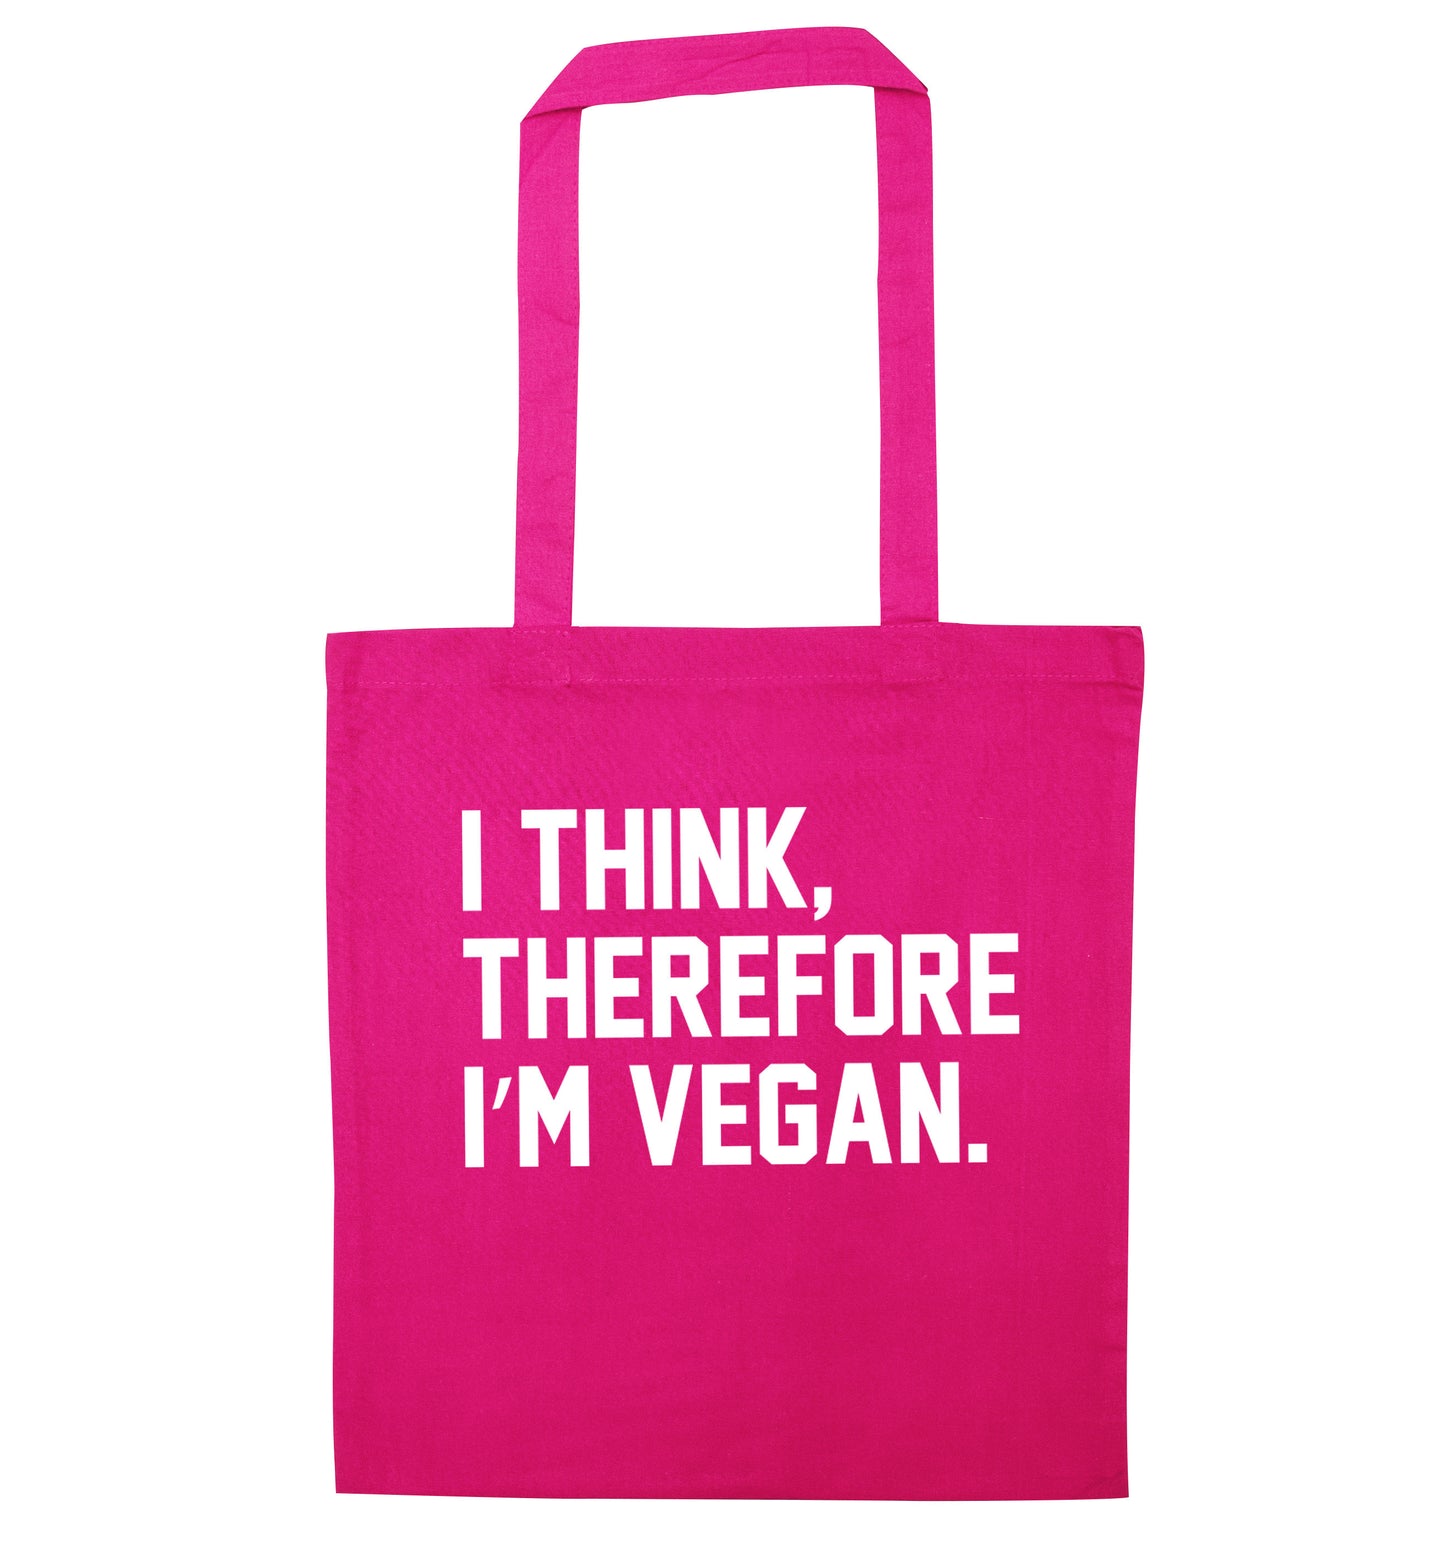 I think therefore I'm vegan pink tote bag